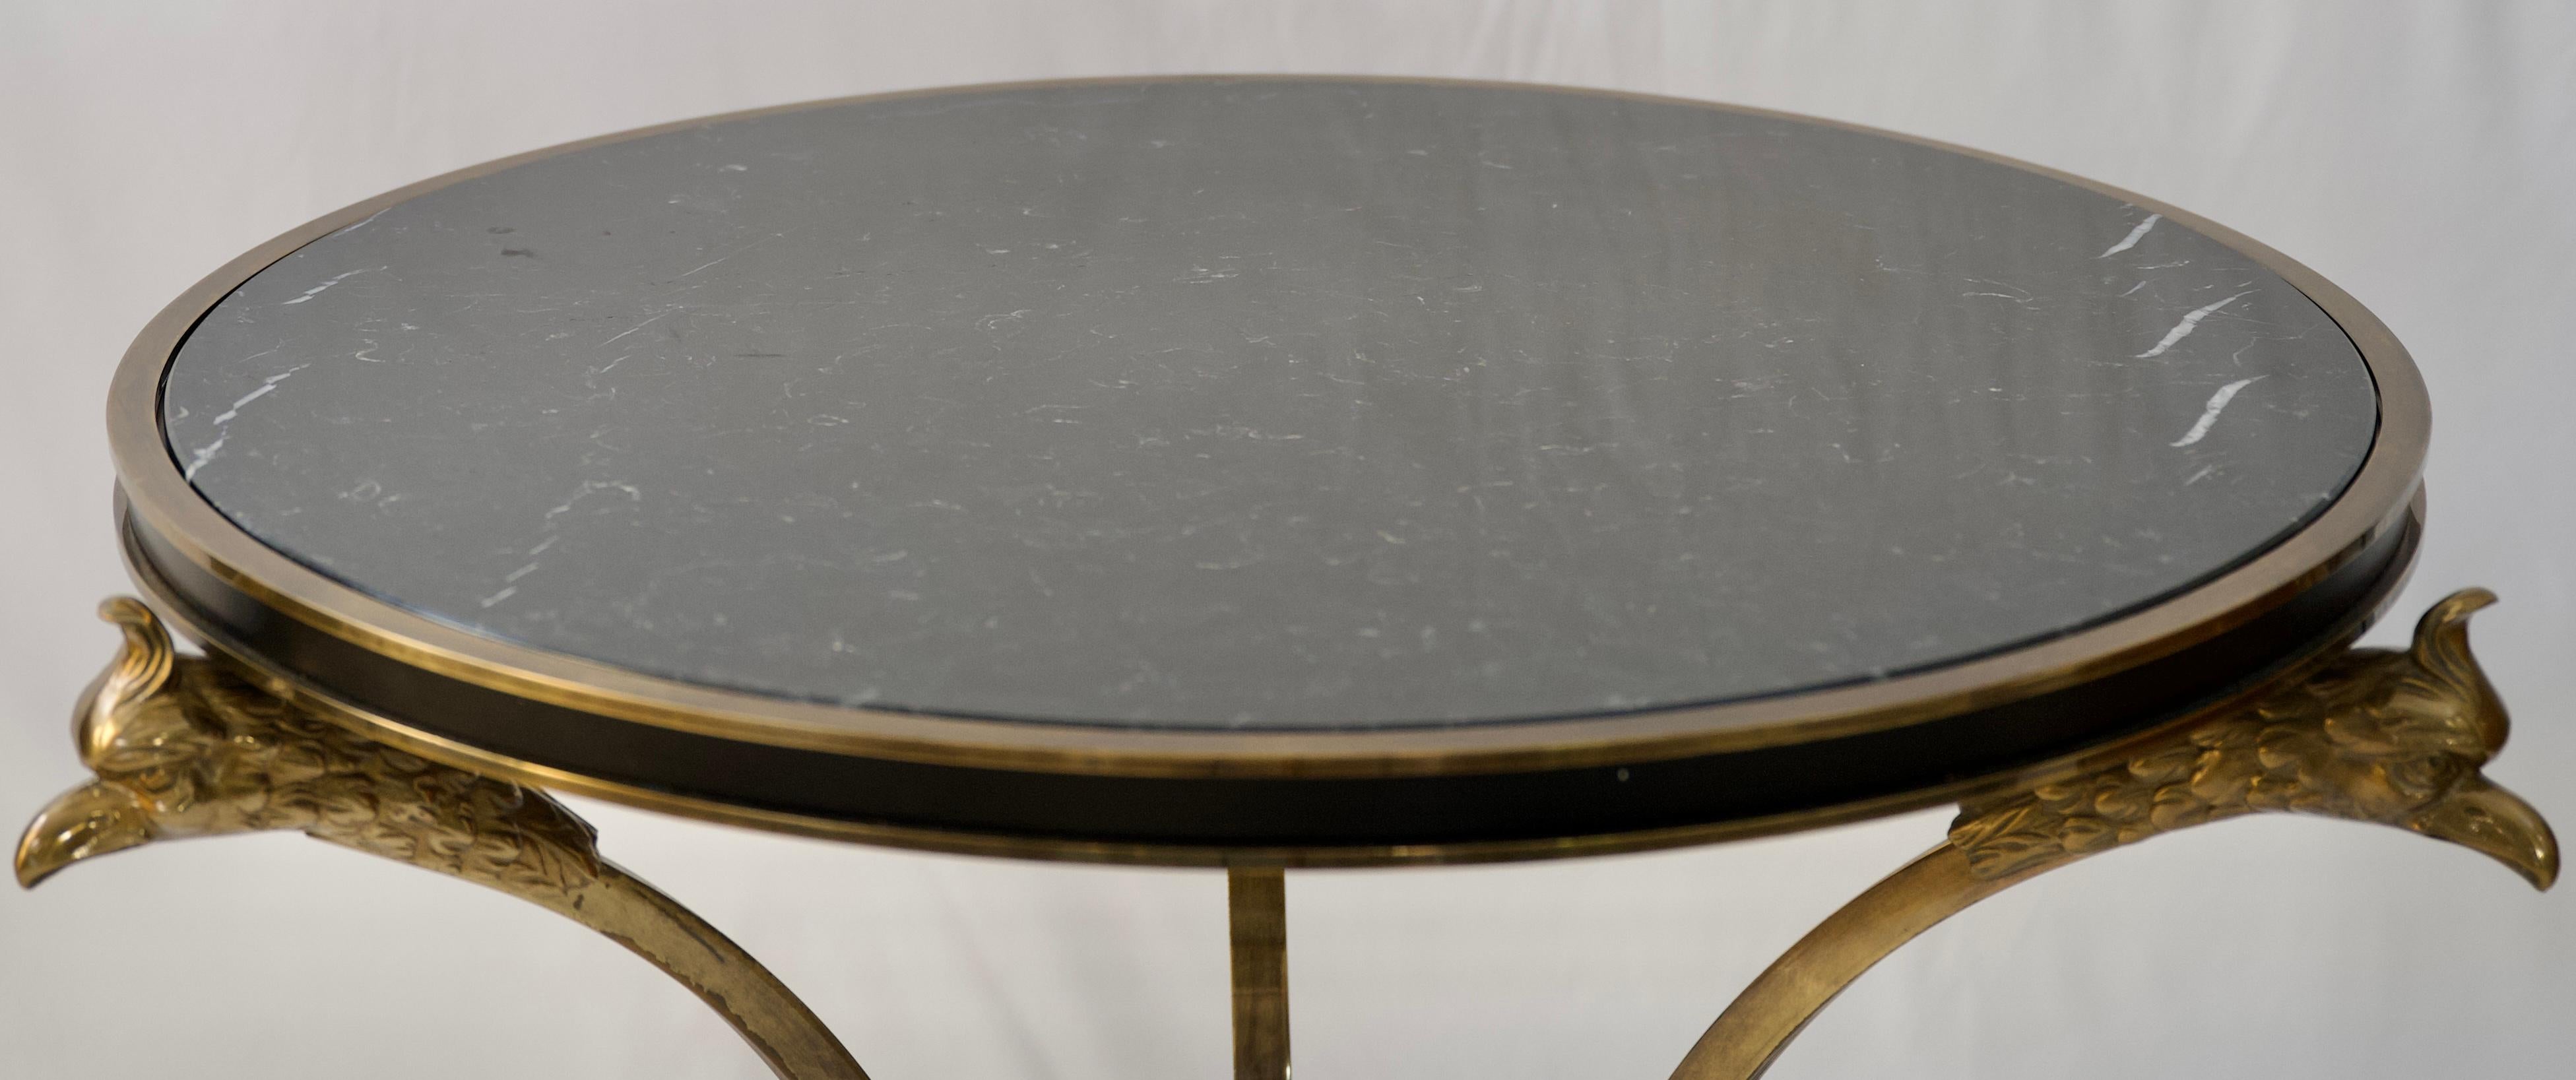 Bronze Pair of End Tables by Alberto Orlandi, Pair of Gueridon Tables with Marble Tops For Sale